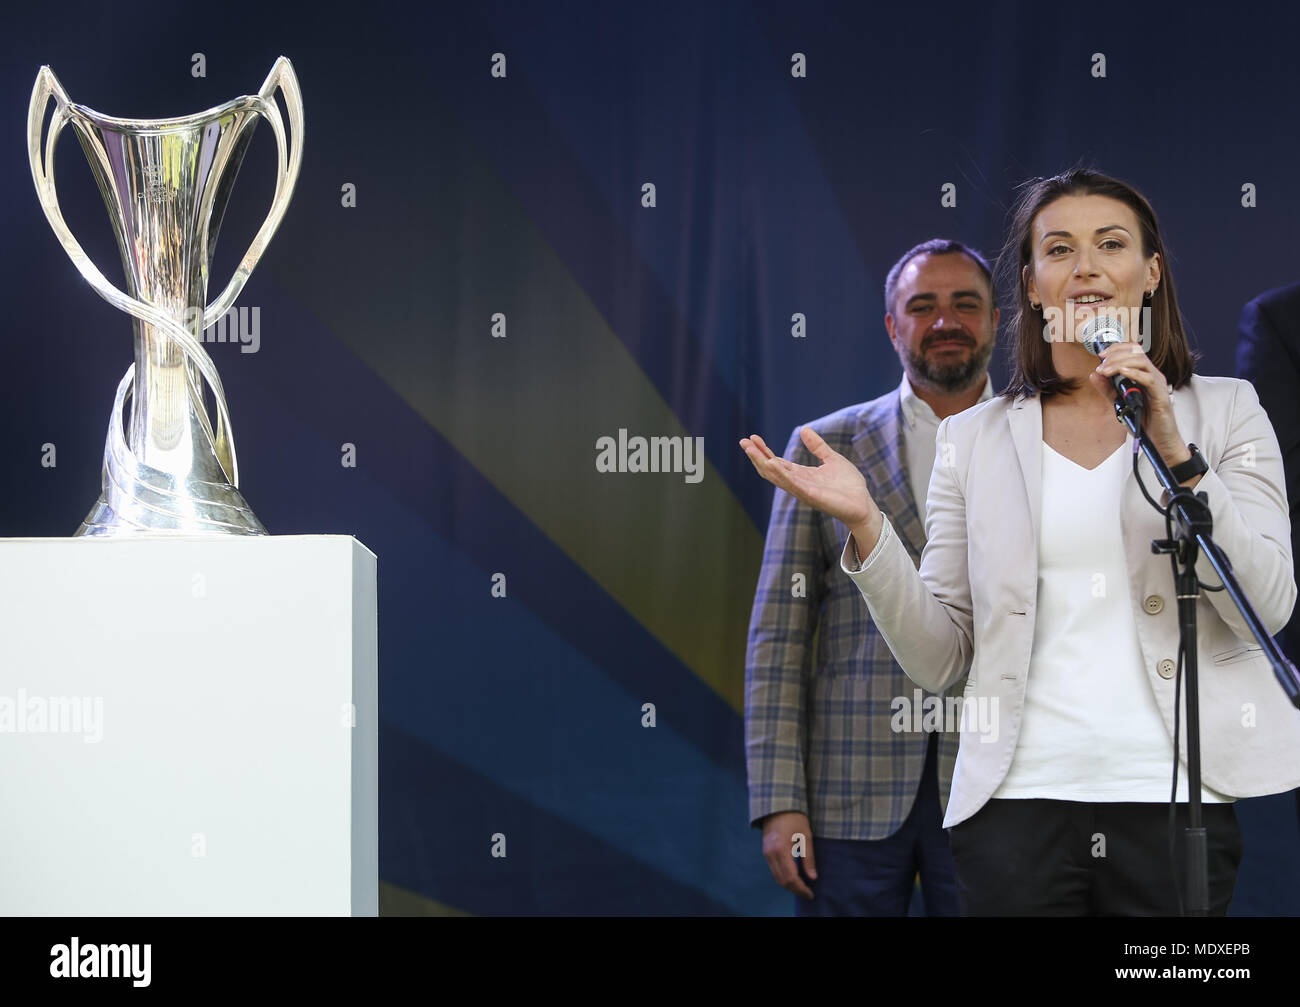 Uefa Champions League Ambassador High Resolution Stock Photography and  Images - Alamy